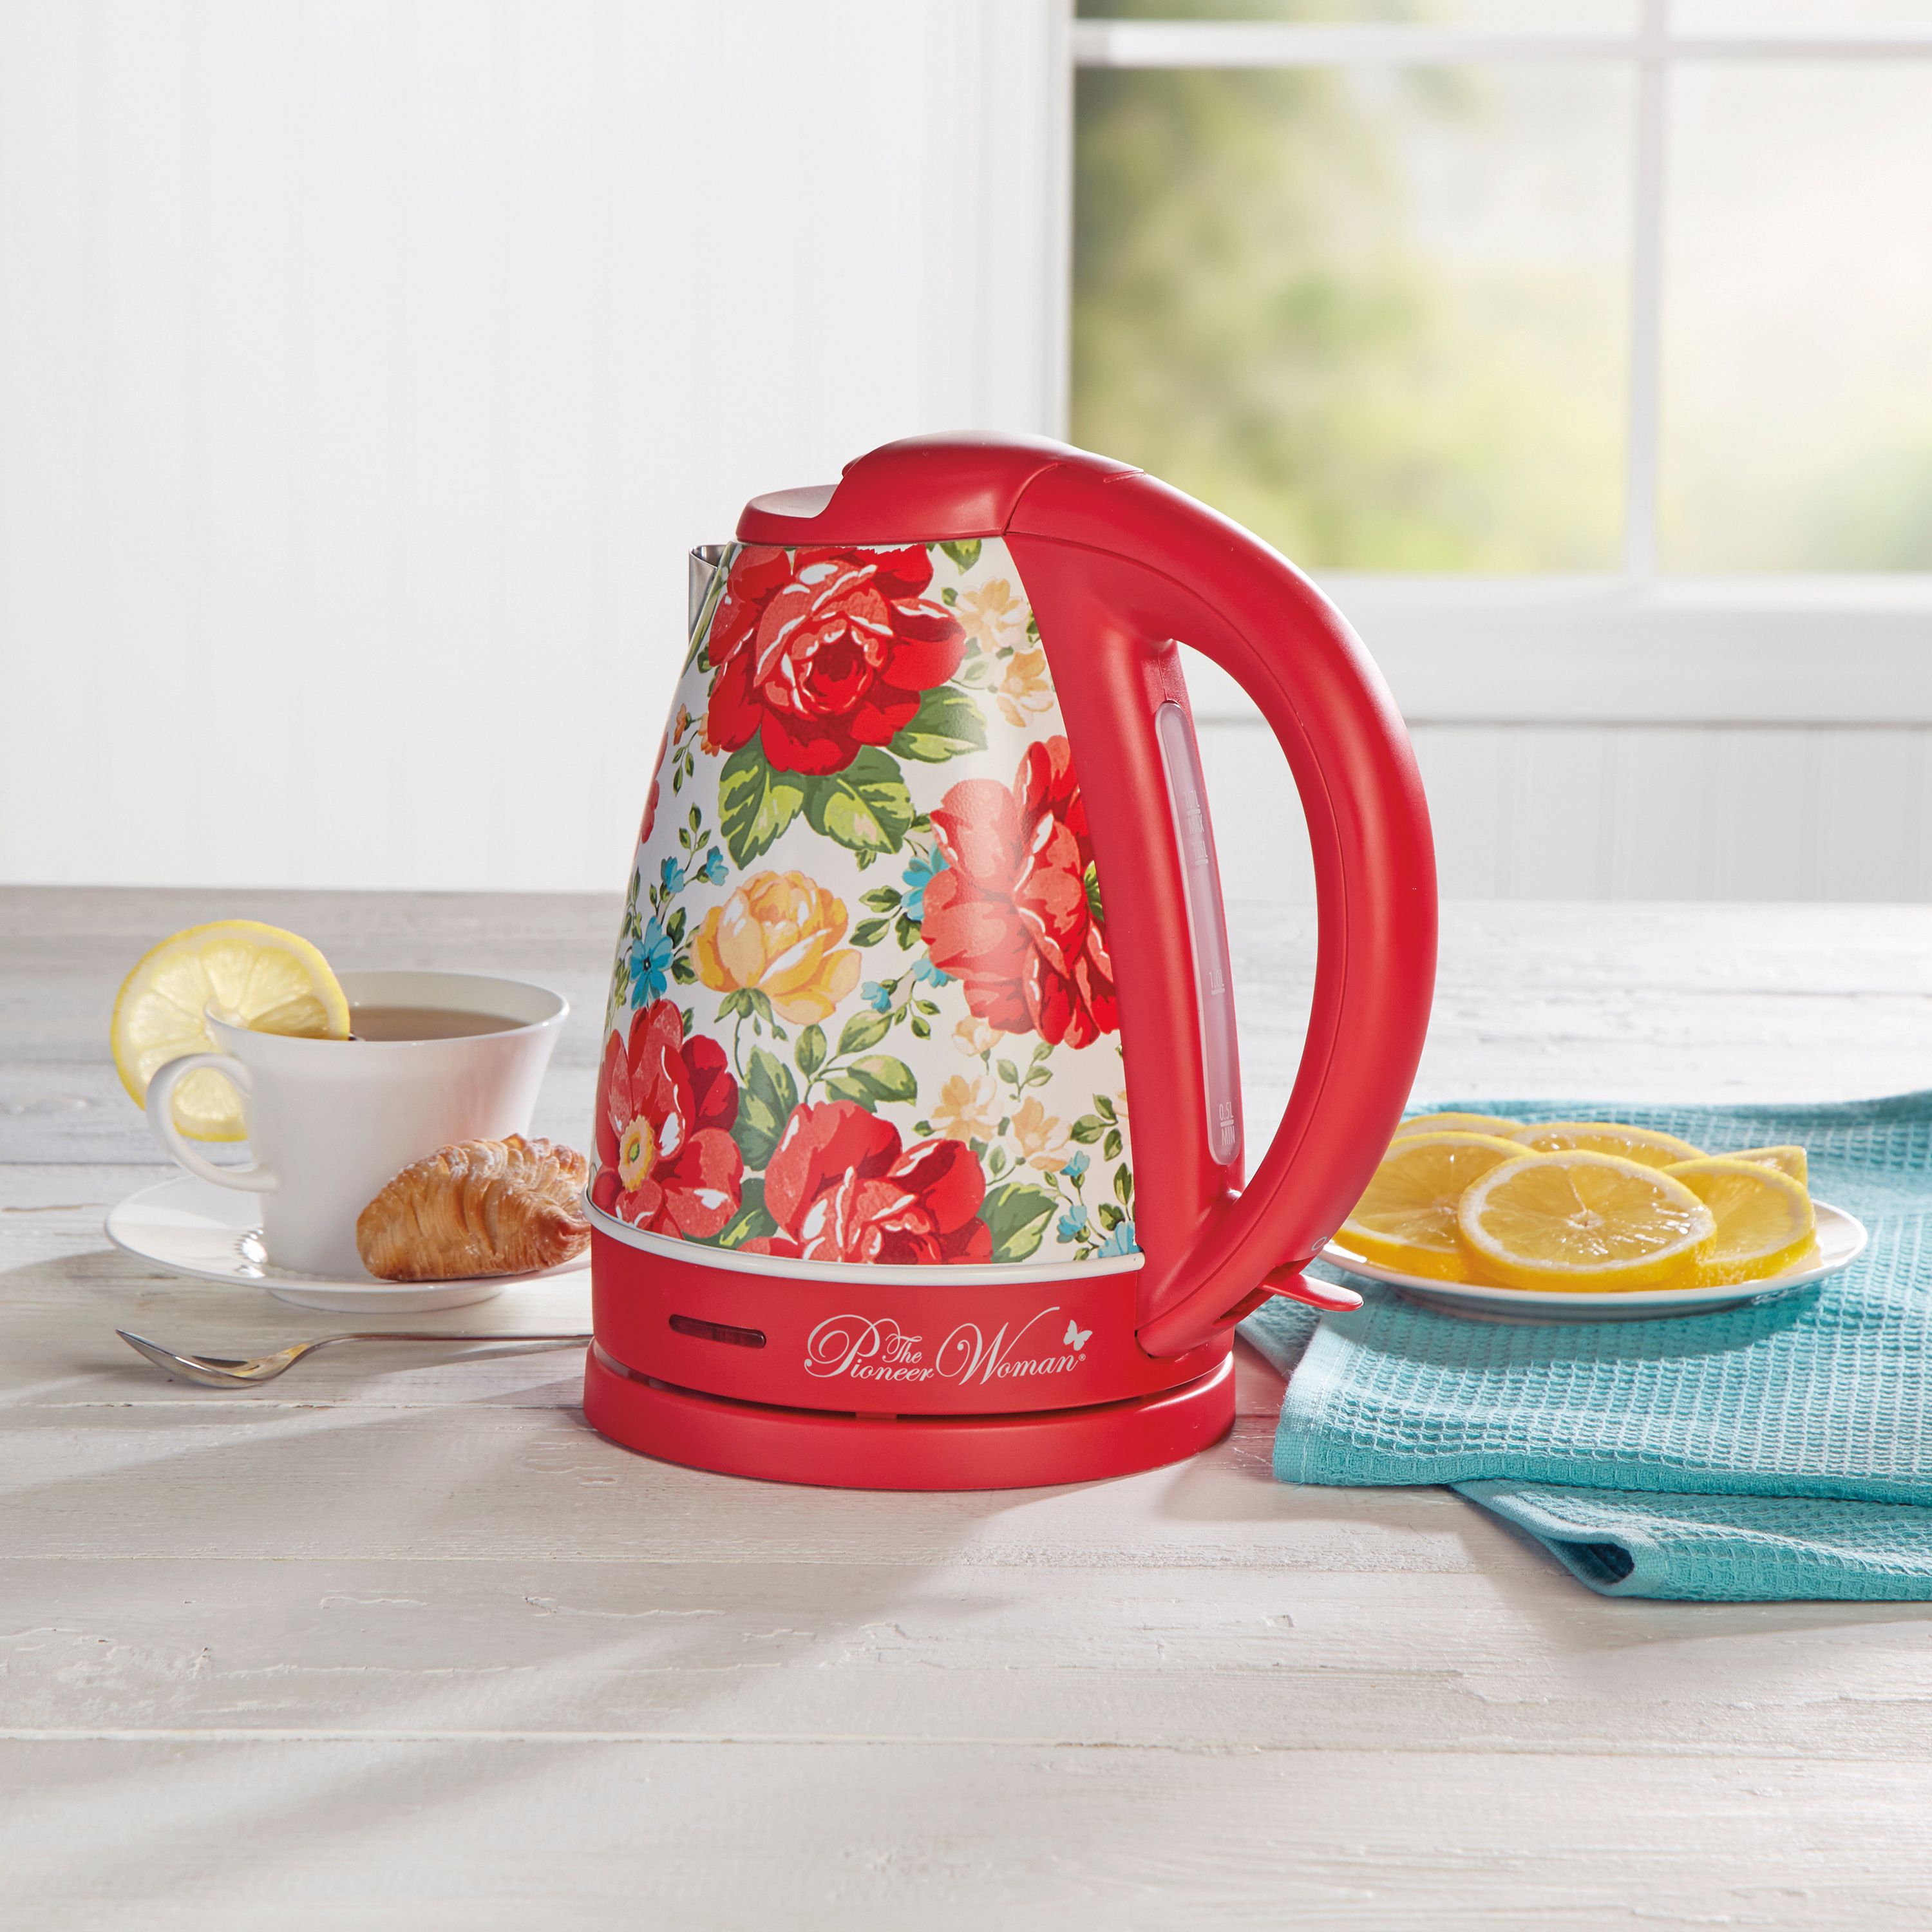 The Pioneer Woman Electric Kettle, Vintage Floral Red, 1.7-Liter, Model 40972 - image 3 of 10